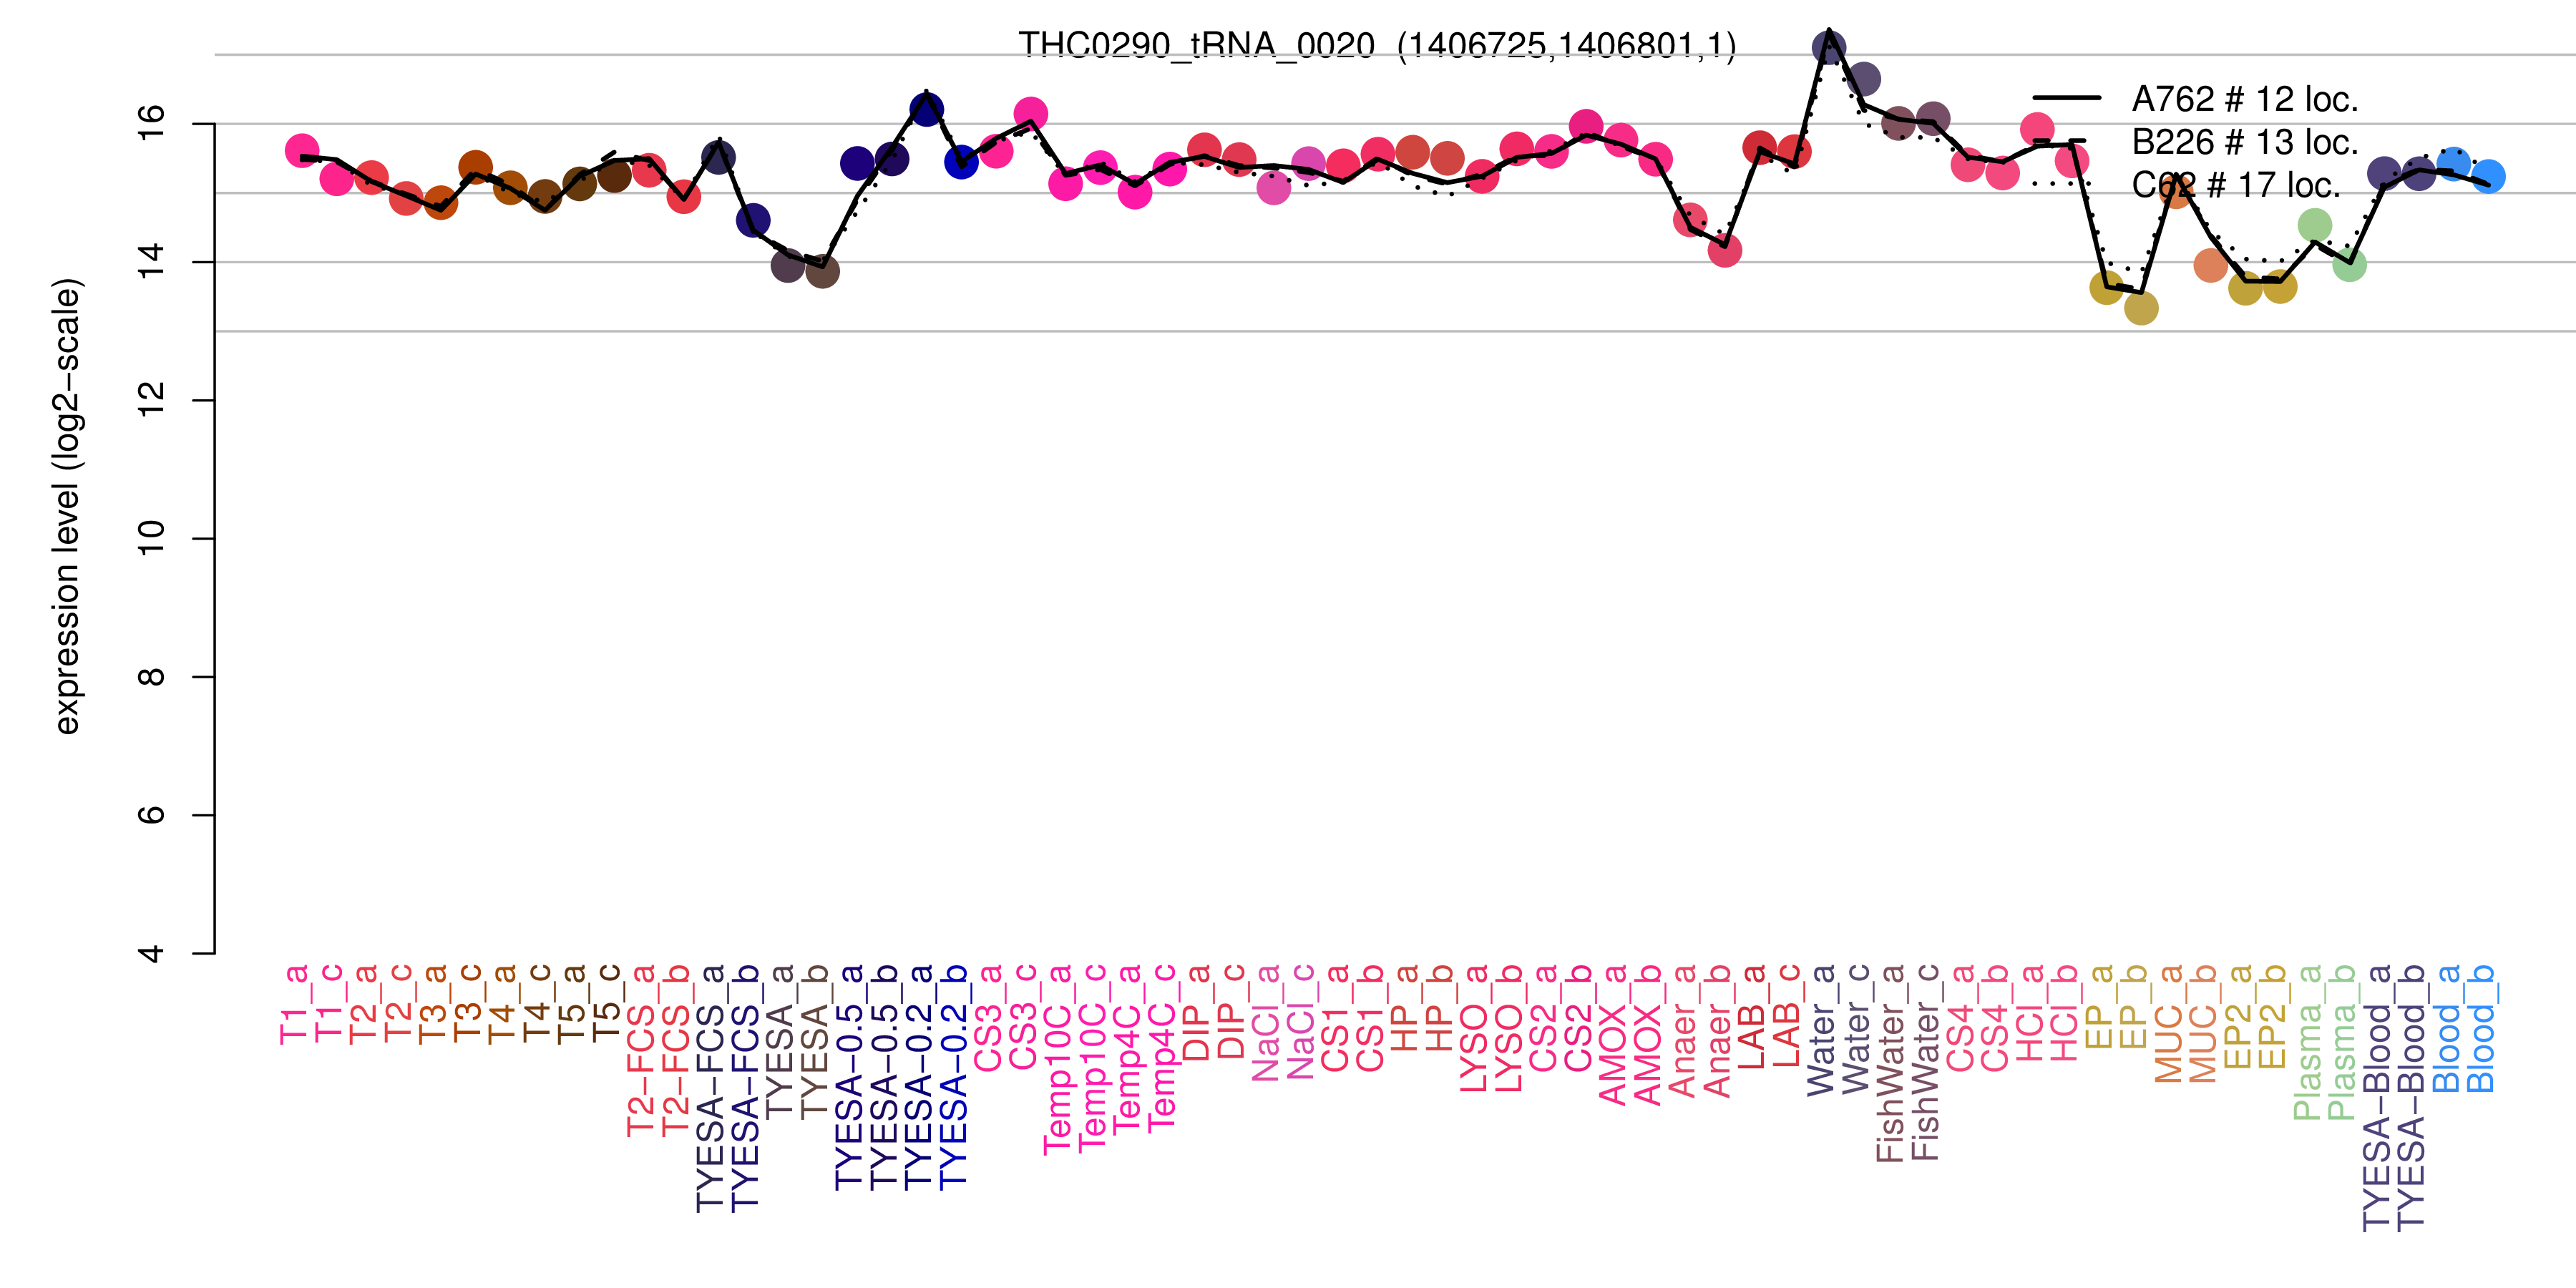 THC0290_tRNA_0020 expression levels among conditions